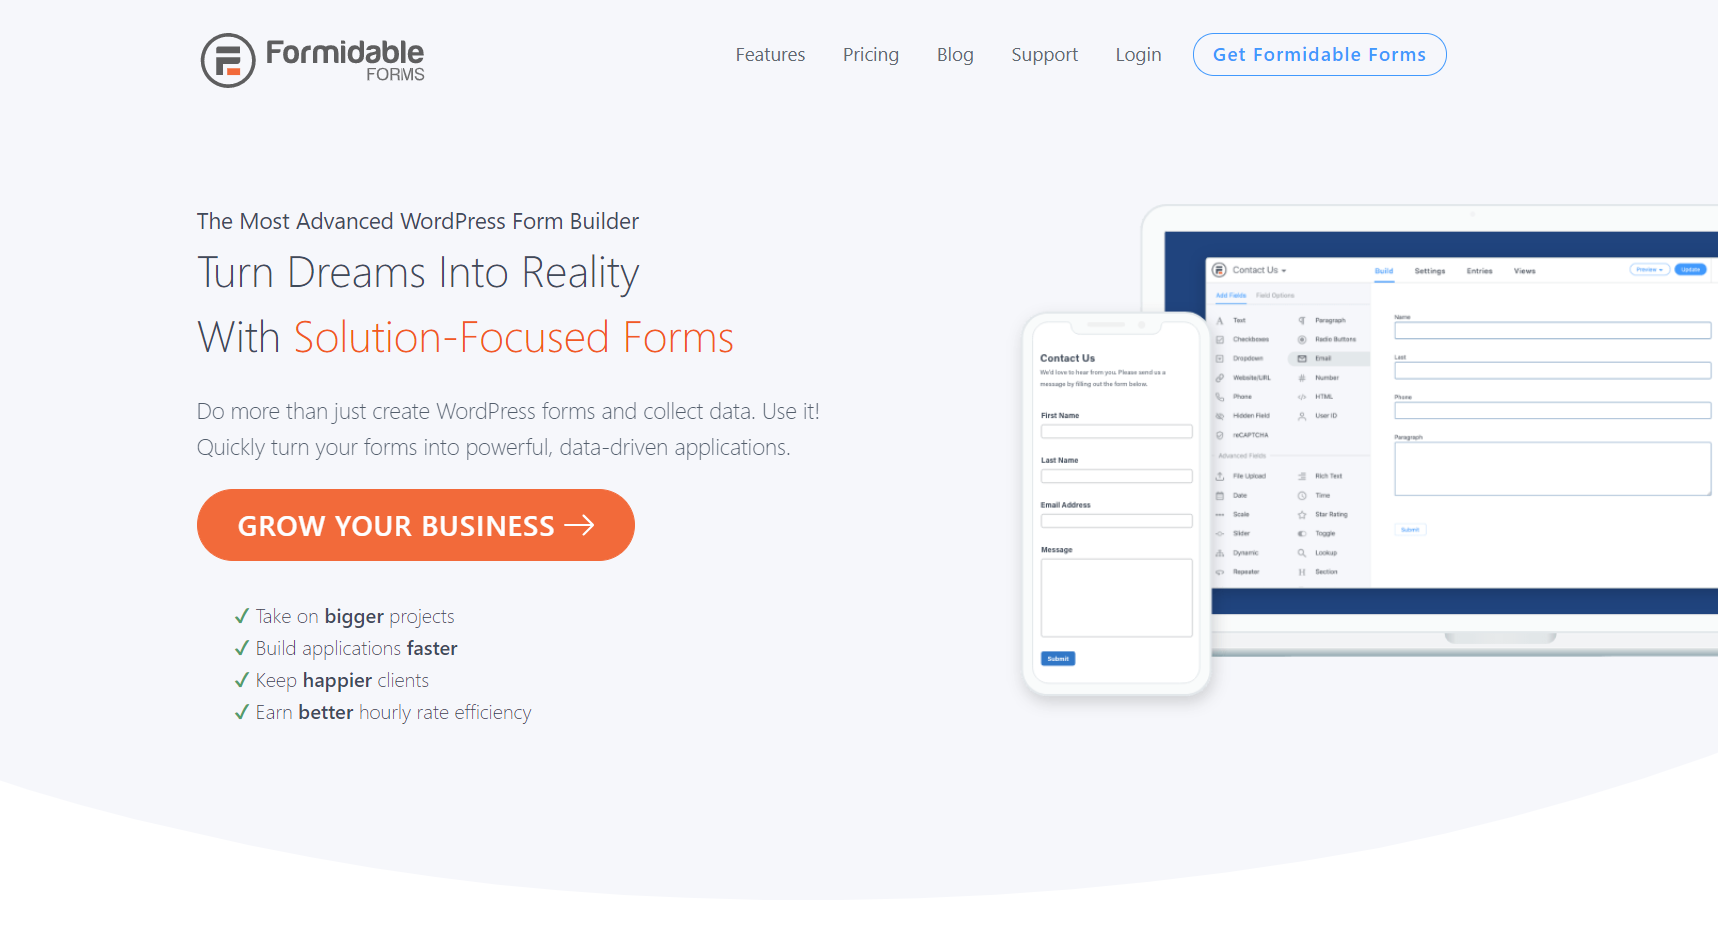 Formidable Forms Review: Why Use Formidable Forms On Your Blog?